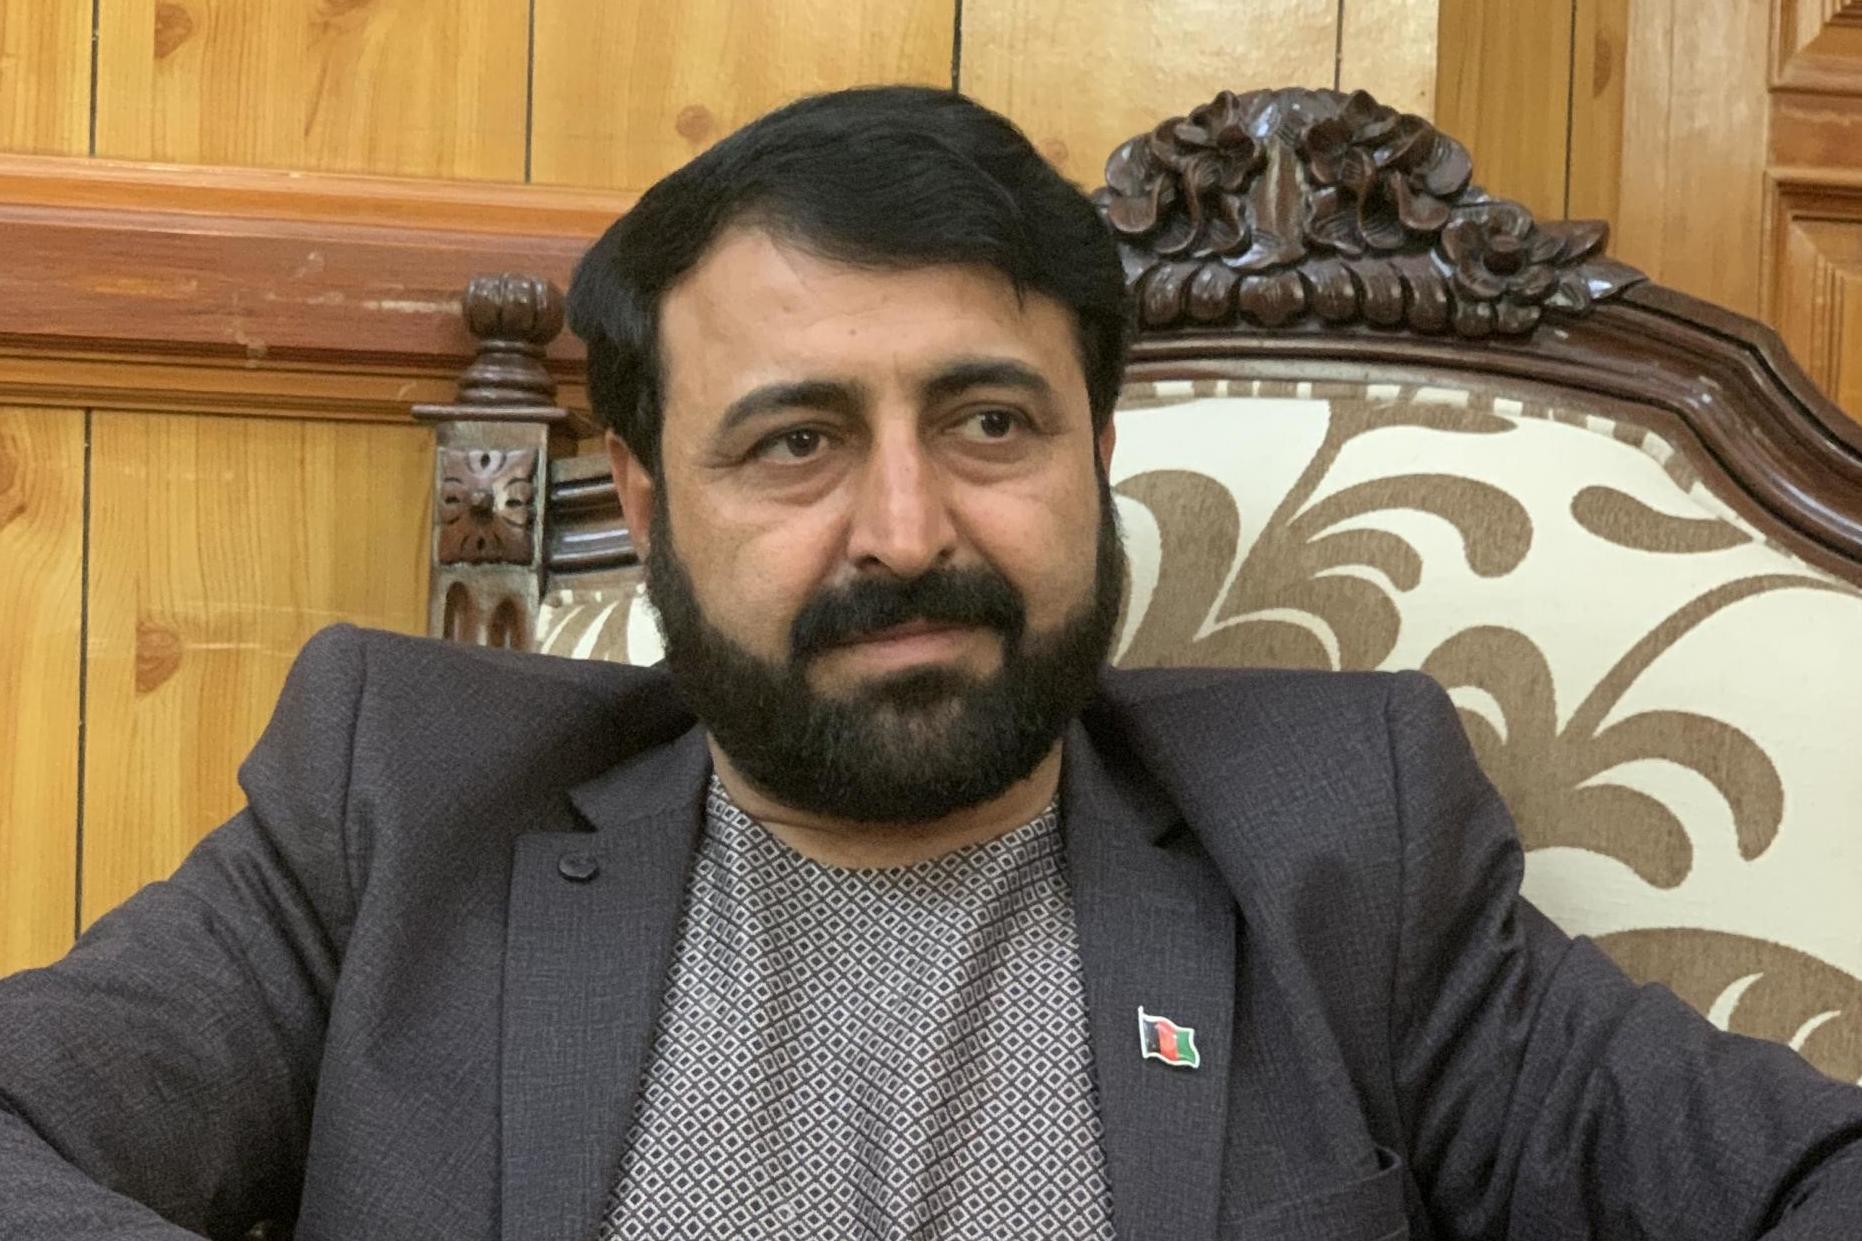 Governor Hayatullah Hayat: This is not a holy war. It’s a political issue with political agendas